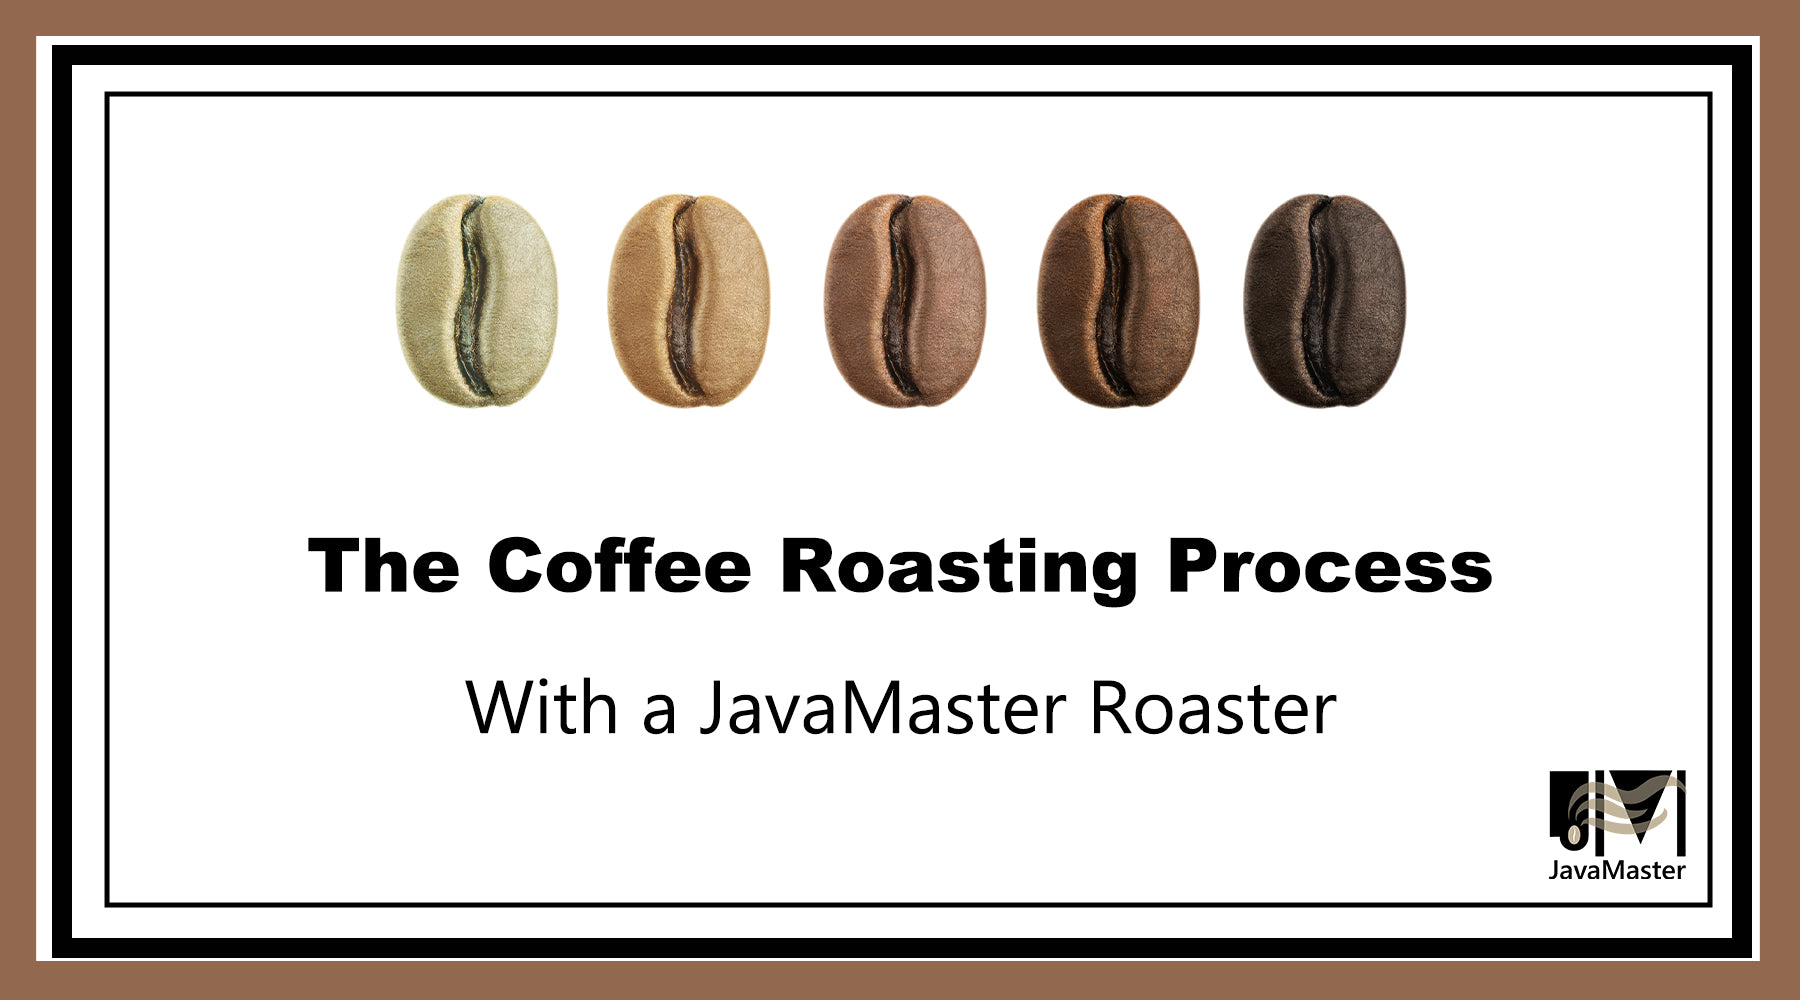 The Coffee Roasting Process With a Java Master Roaster